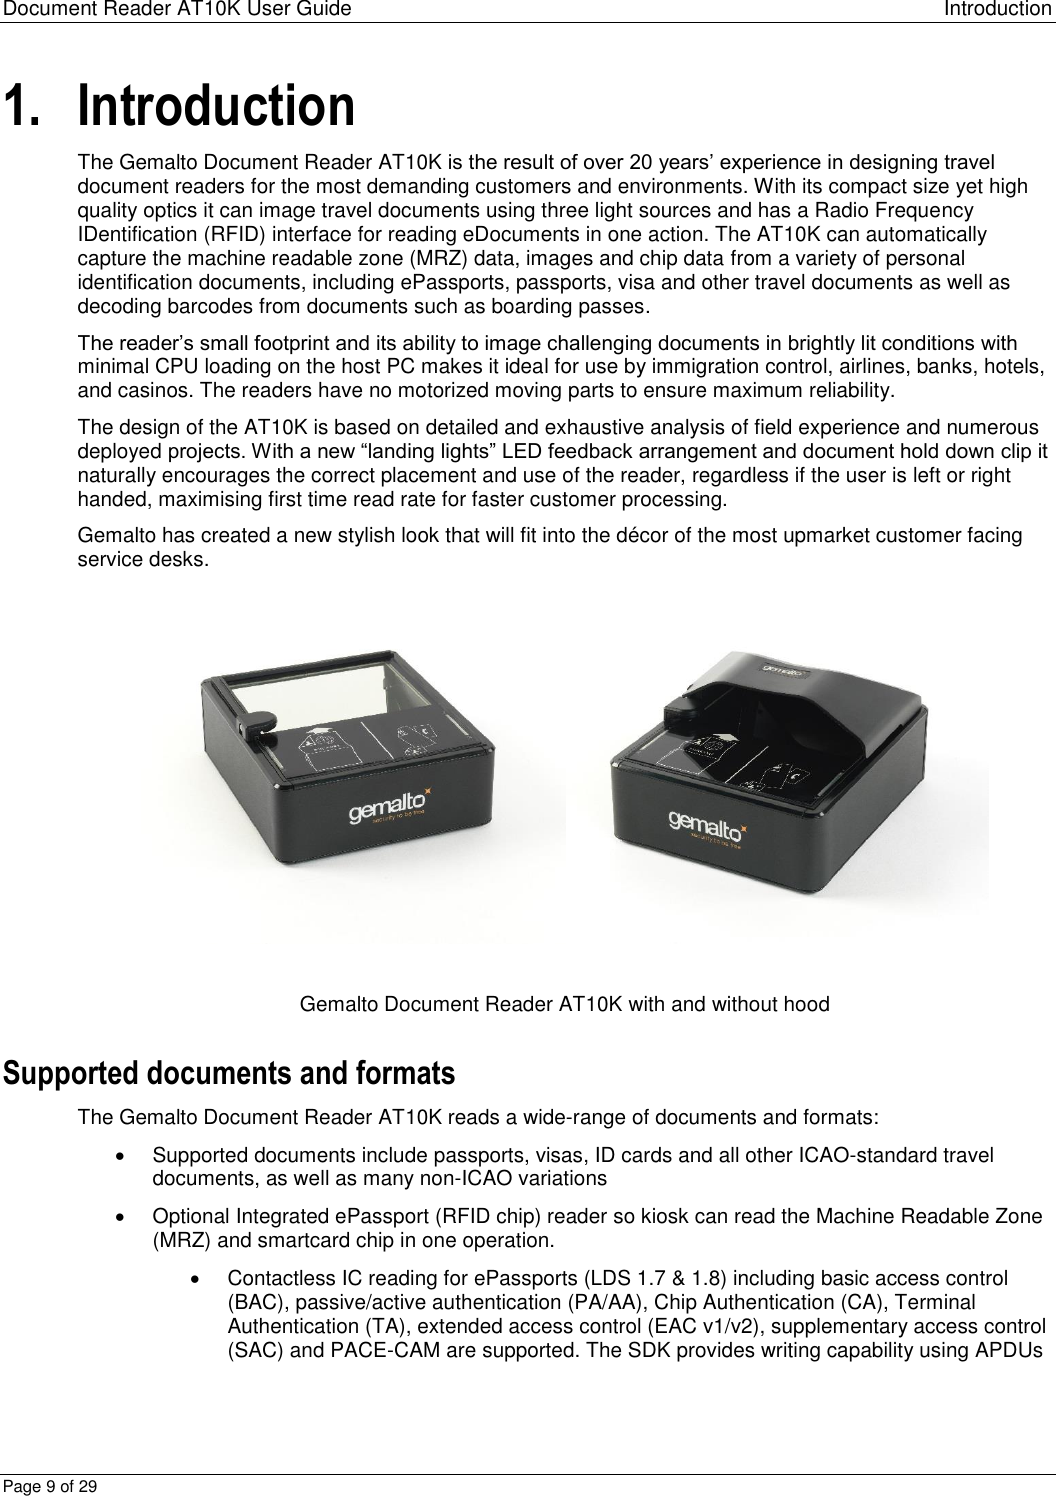 Document Reader AT10K User Guide Introduction Page 9 of 29 1. Introduction The Gemalto Document Reader AT10K is the result of over 20 years’ experience in designing travel document readers for the most demanding customers and environments. With its compact size yet high quality optics it can image travel documents using three light sources and has a Radio Frequency IDentification (RFID) interface for reading eDocuments in one action. The AT10K can automatically capture the machine readable zone (MRZ) data, images and chip data from a variety of personal identification documents, including ePassports, passports, visa and other travel documents as well as decoding barcodes from documents such as boarding passes. The reader’s small footprint and its ability to image challenging documents in brightly lit conditions with minimal CPU loading on the host PC makes it ideal for use by immigration control, airlines, banks, hotels, and casinos. The readers have no motorized moving parts to ensure maximum reliability. The design of the AT10K is based on detailed and exhaustive analysis of field experience and numerous deployed projects. With a new “landing lights” LED feedback arrangement and document hold down clip it naturally encourages the correct placement and use of the reader, regardless if the user is left or right handed, maximising first time read rate for faster customer processing.  Gemalto has created a new stylish look that will fit into the décor of the most upmarket customer facing service desks.   Gemalto Document Reader AT10K with and without hood Supported documents and formats The Gemalto Document Reader AT10K reads a wide-range of documents and formats:   Supported documents include passports, visas, ID cards and all other ICAO-standard travel documents, as well as many non-ICAO variations   Optional Integrated ePassport (RFID chip) reader so kiosk can read the Machine Readable Zone (MRZ) and smartcard chip in one operation.    Contactless IC reading for ePassports (LDS 1.7 &amp; 1.8) including basic access control (BAC), passive/active authentication (PA/AA), Chip Authentication (CA), Terminal Authentication (TA), extended access control (EAC v1/v2), supplementary access control (SAC) and PACE-CAM are supported. The SDK provides writing capability using APDUs 